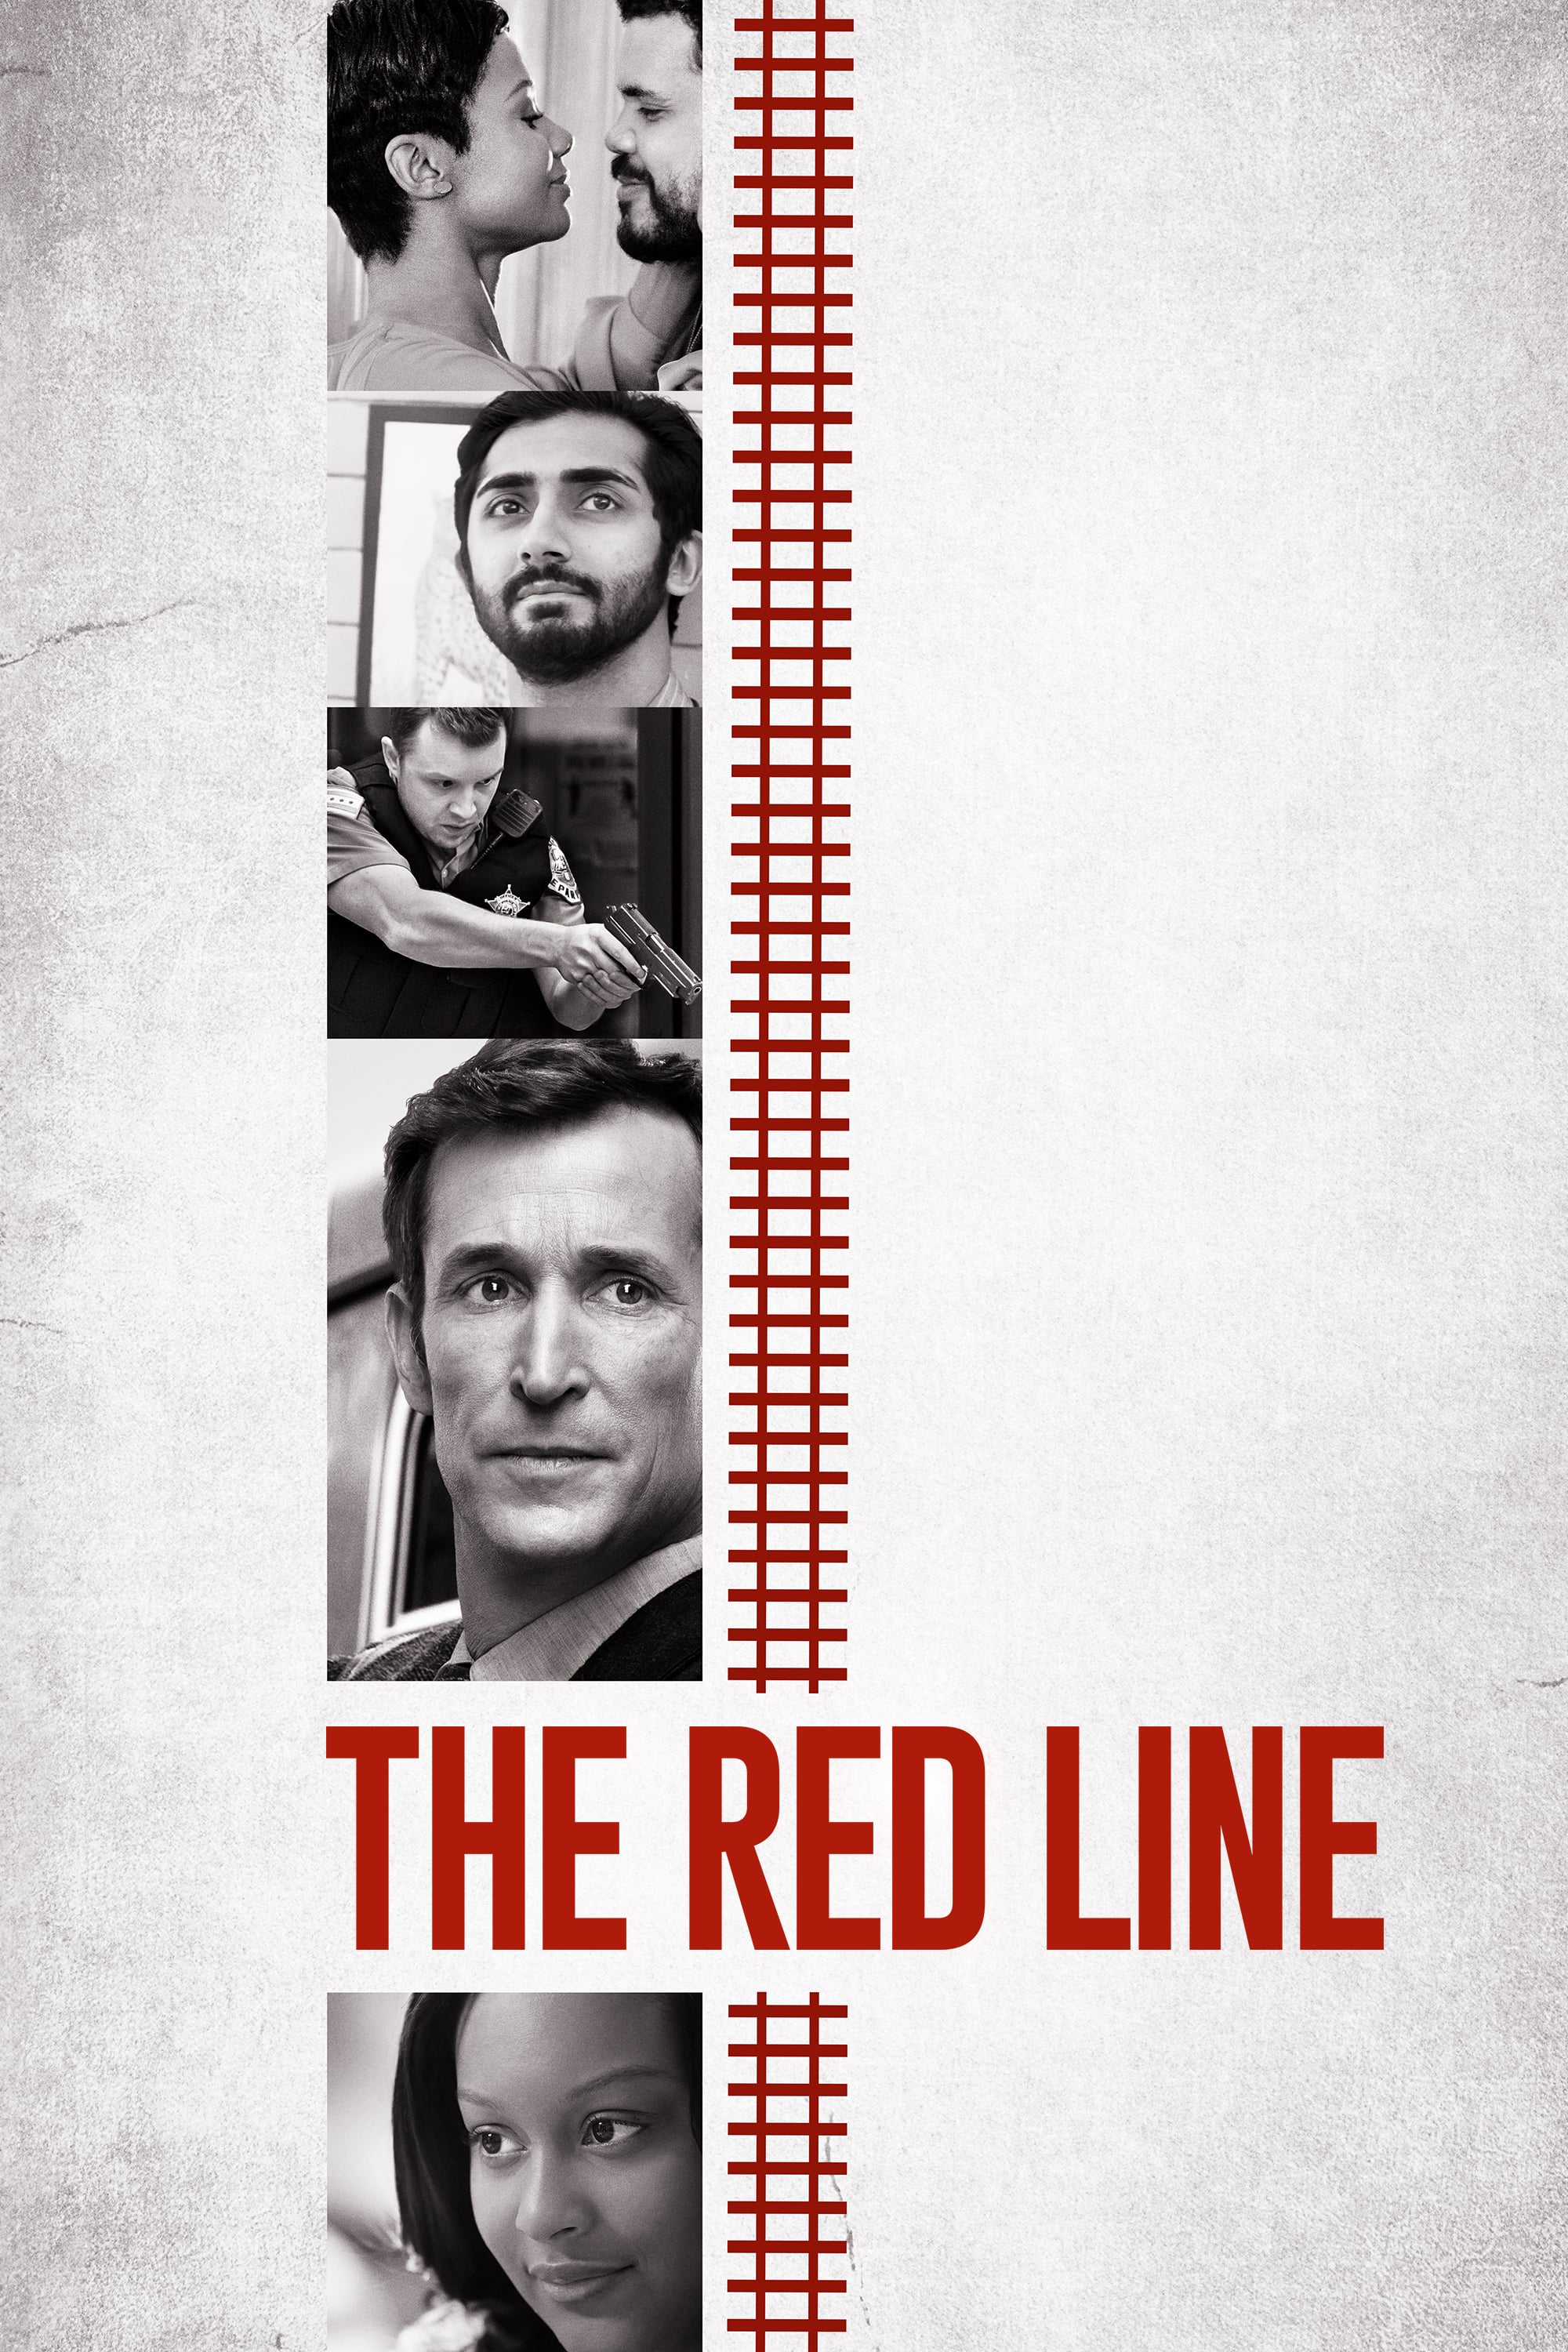 The Red Line rating